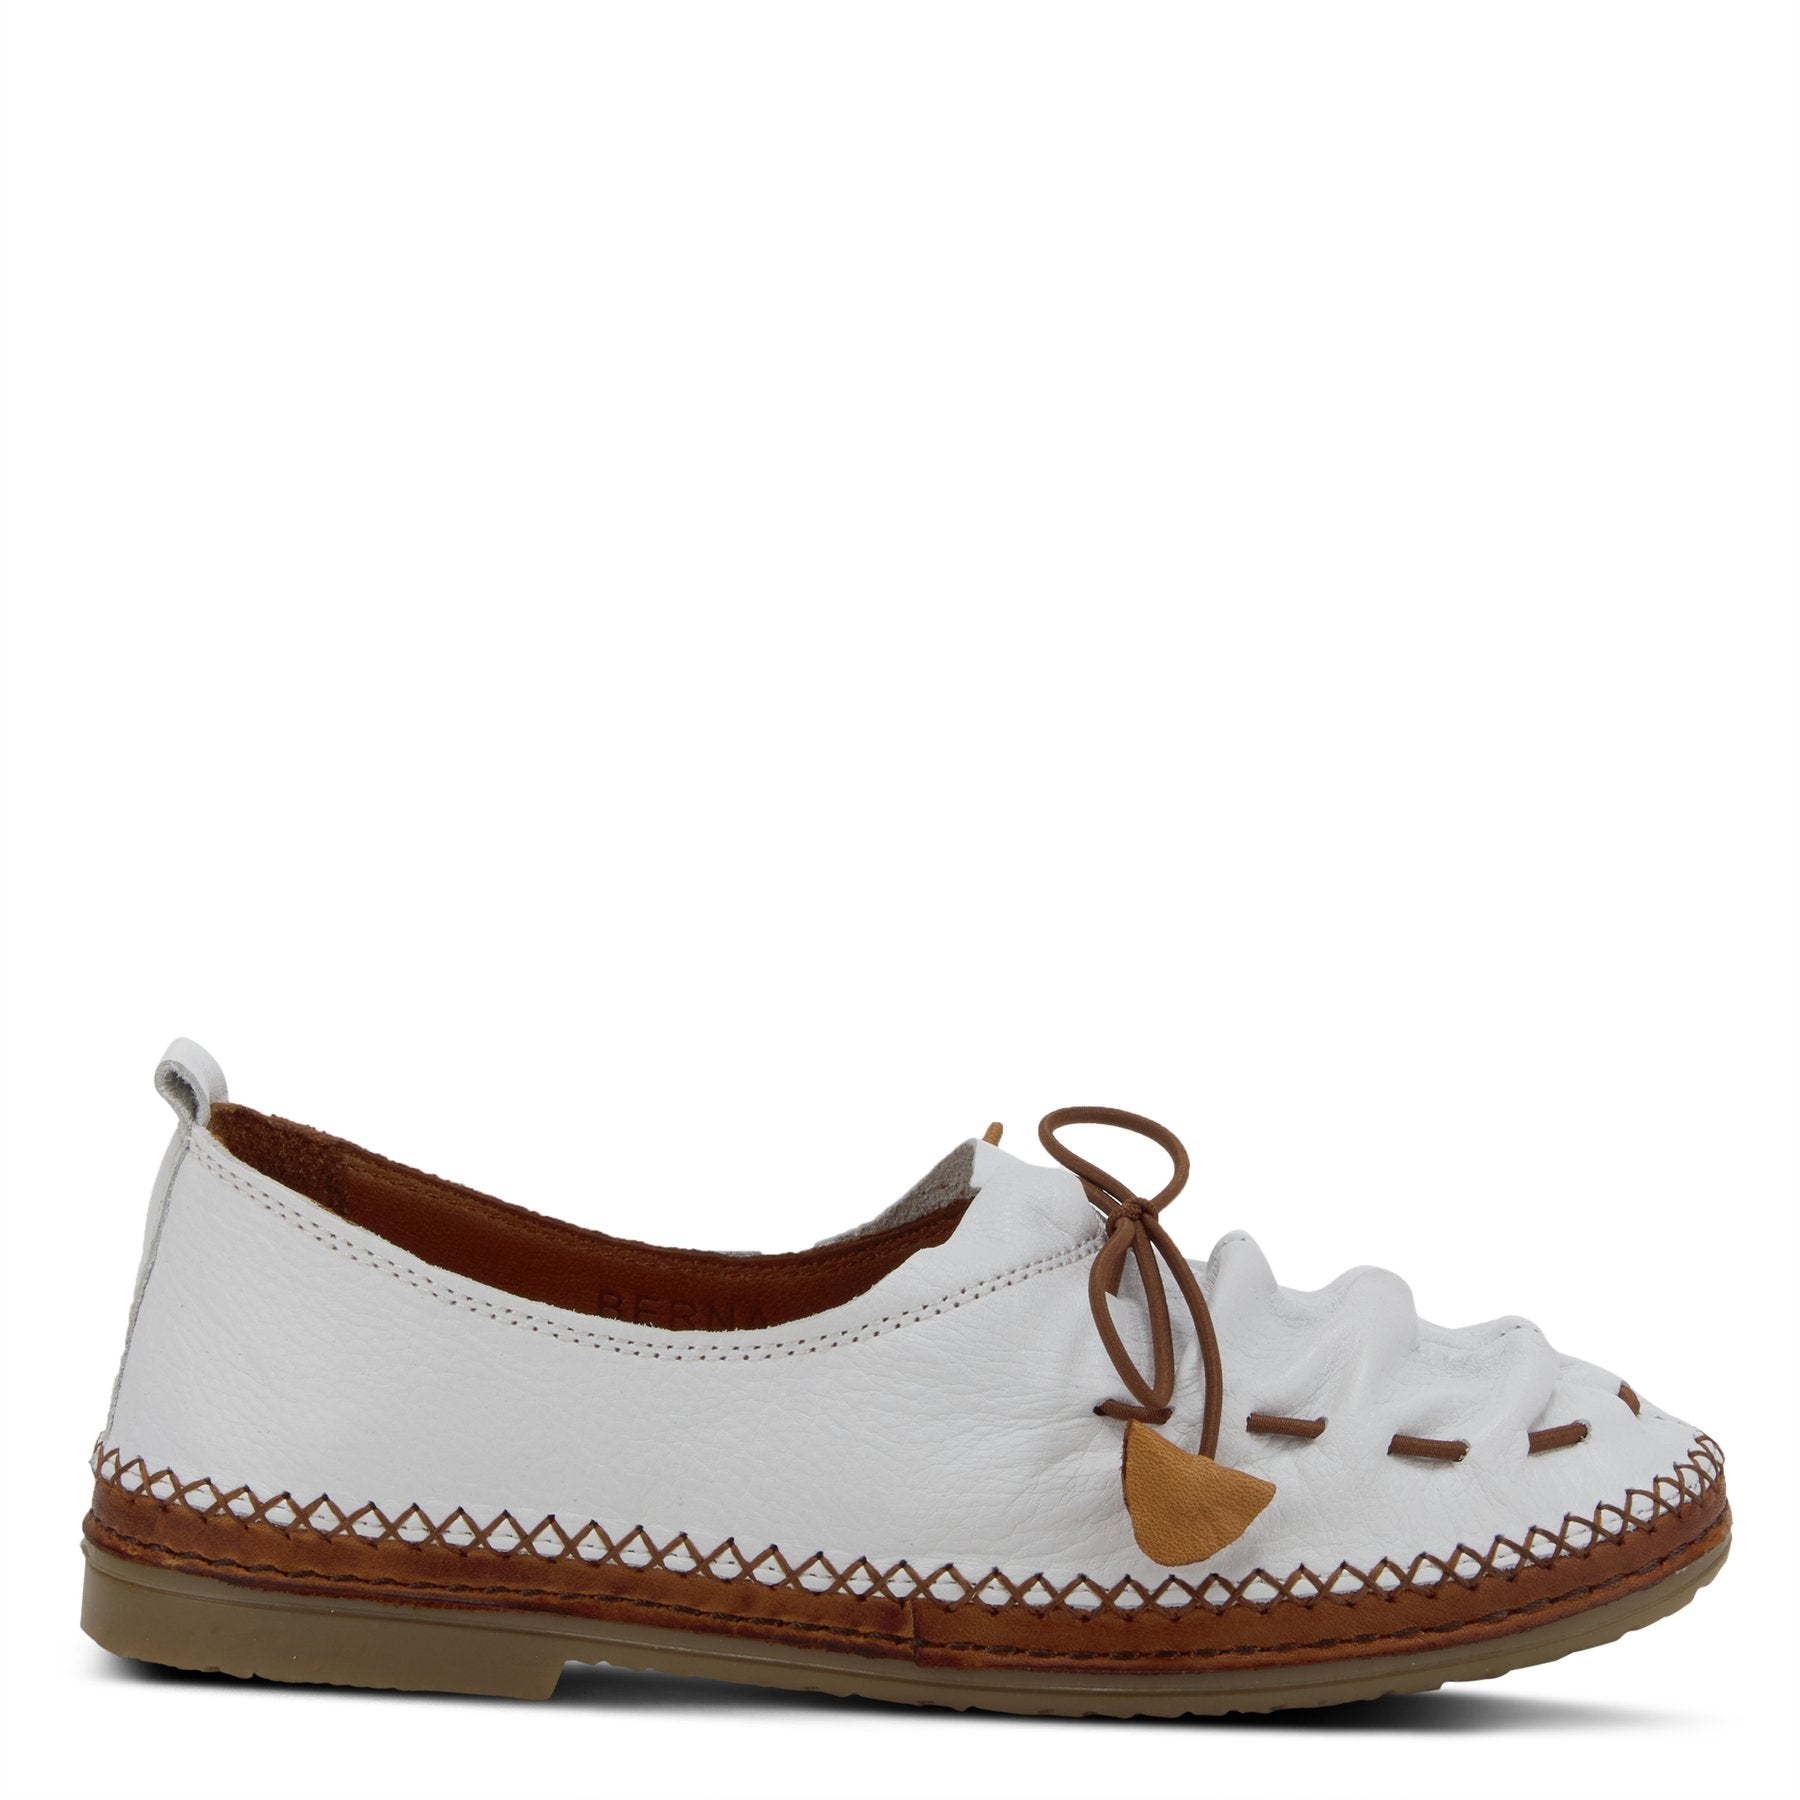 Outer side view of the Spring Step Berna Slip-On Shoe. This closed-toe shoe is flat and white with brown stitching and a brown elastic vamp with a brown tie.